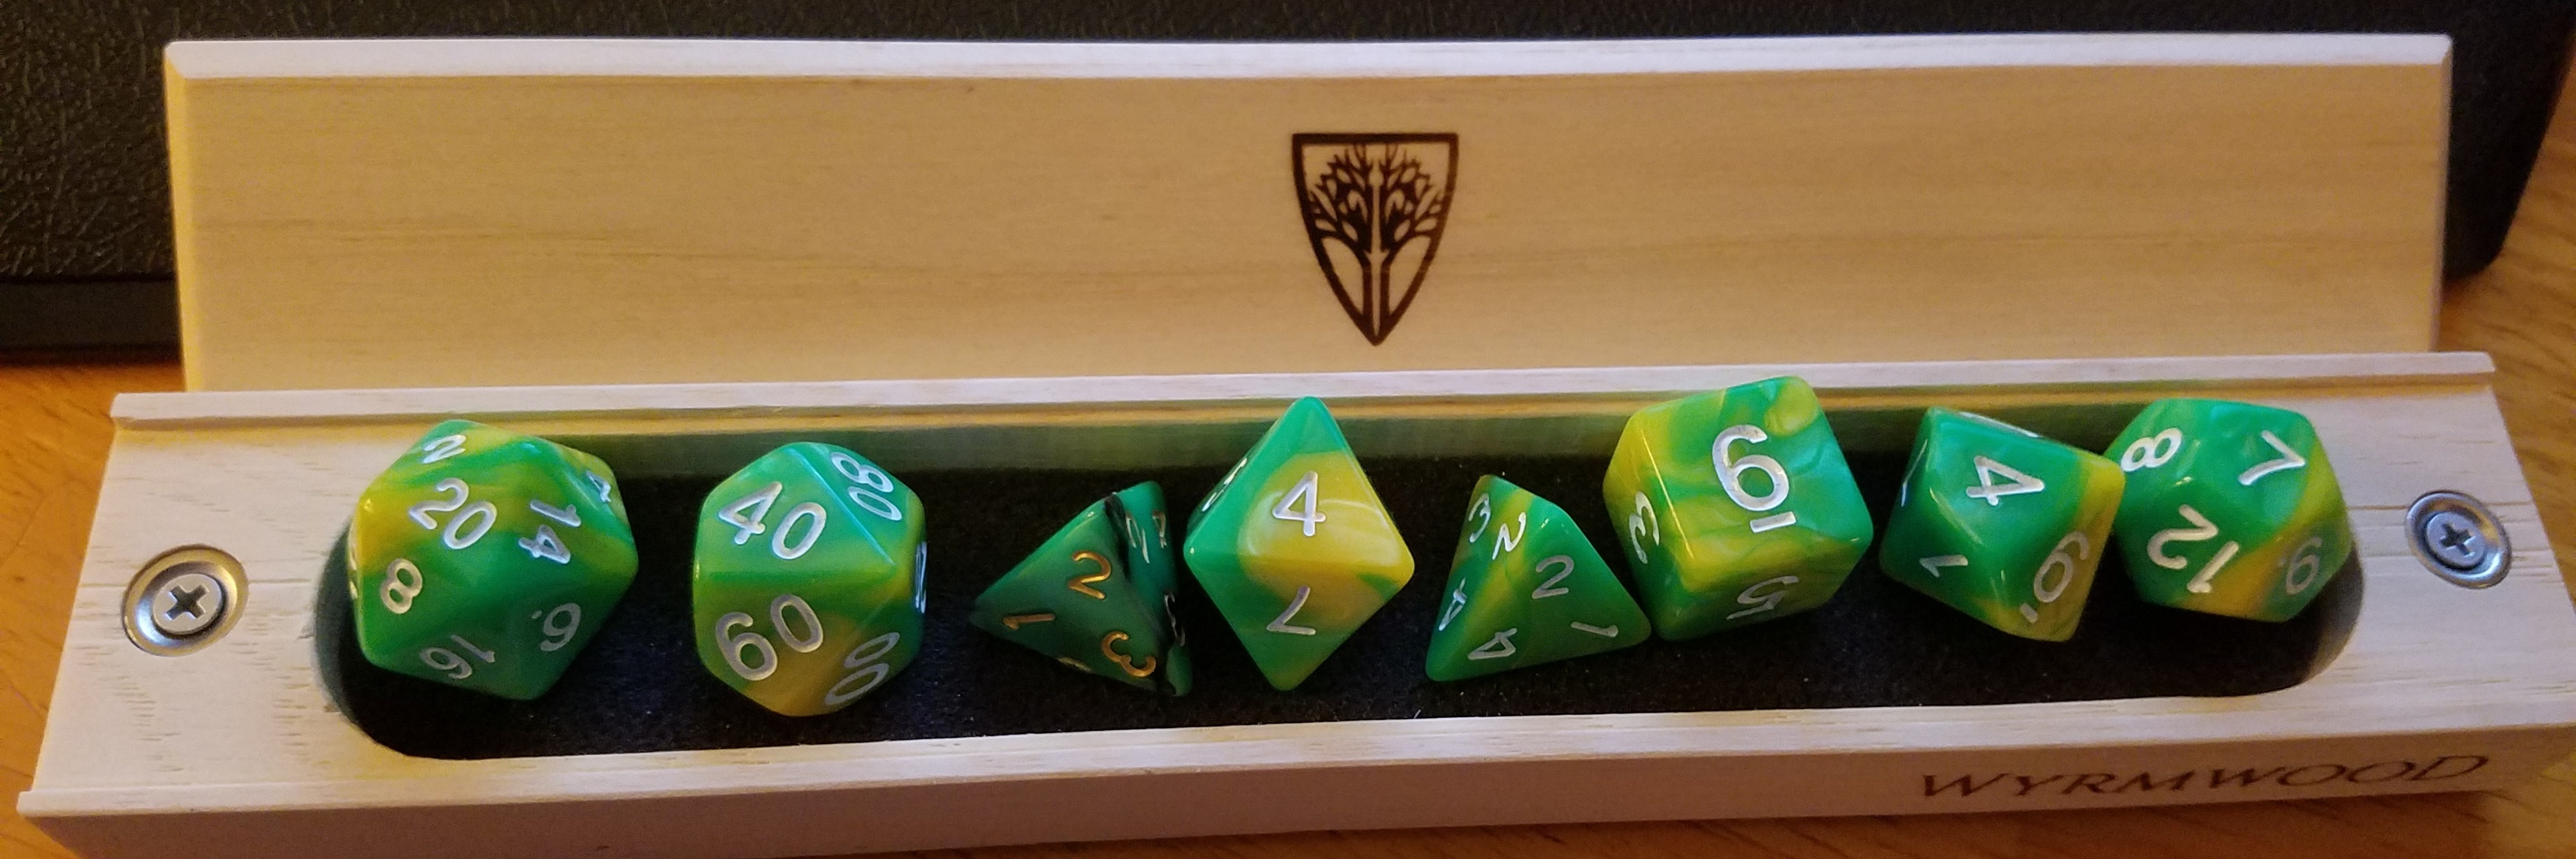 wyrmwood box from dungeons and dragons